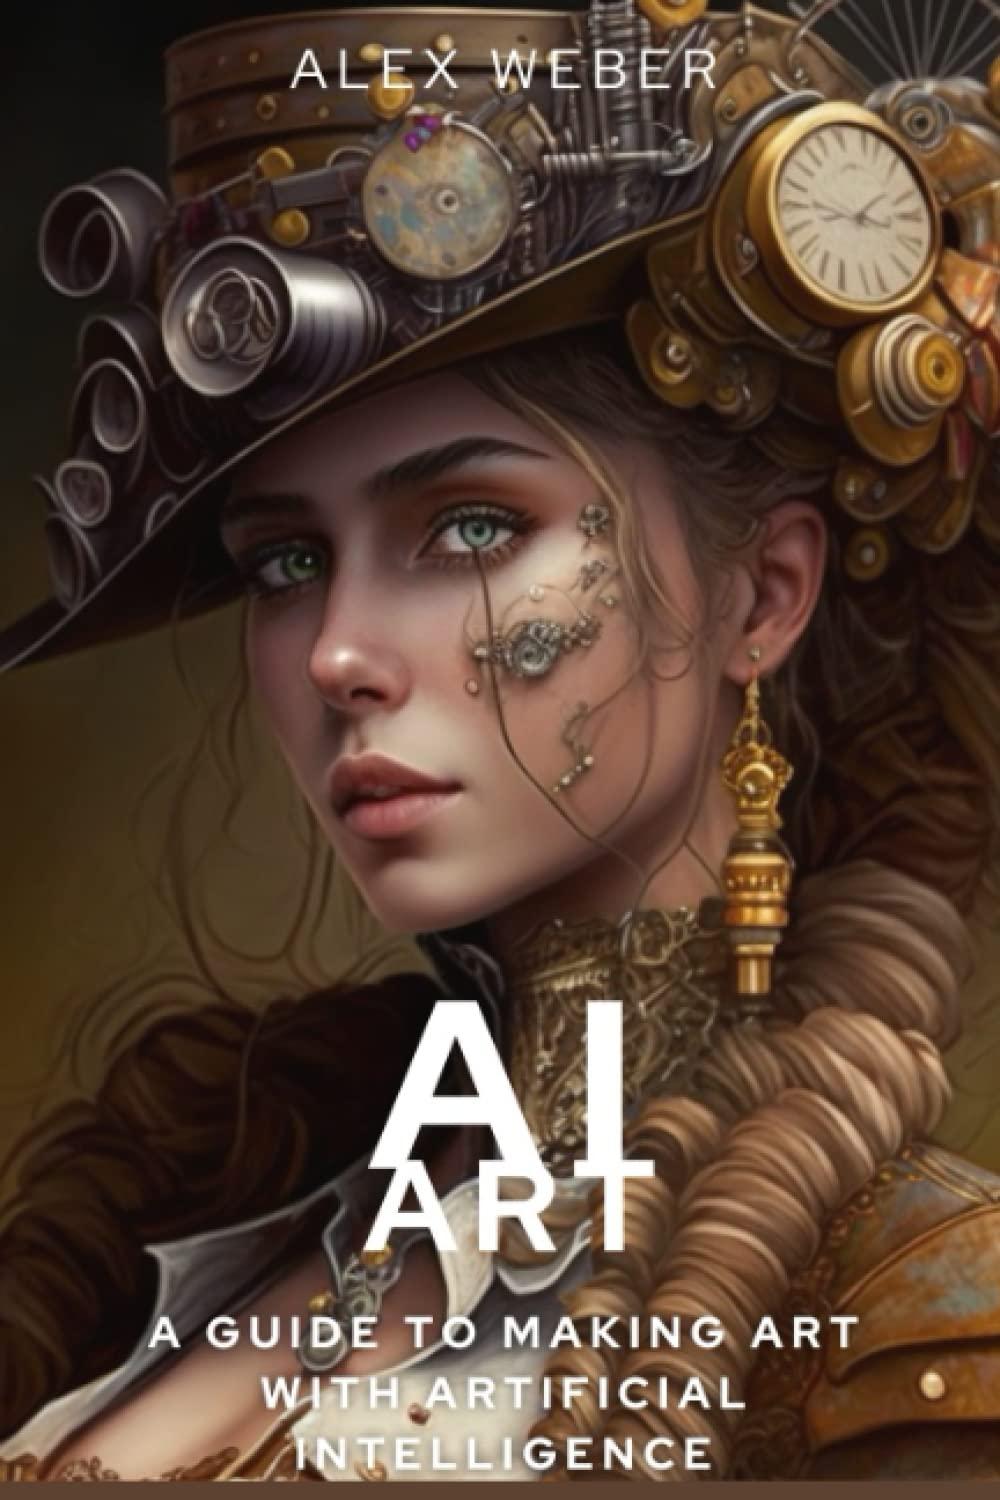 ai art  a guide to making art with artificial intelligence 1st edition alex weber b0bsv5m1v6, 979-8374358551